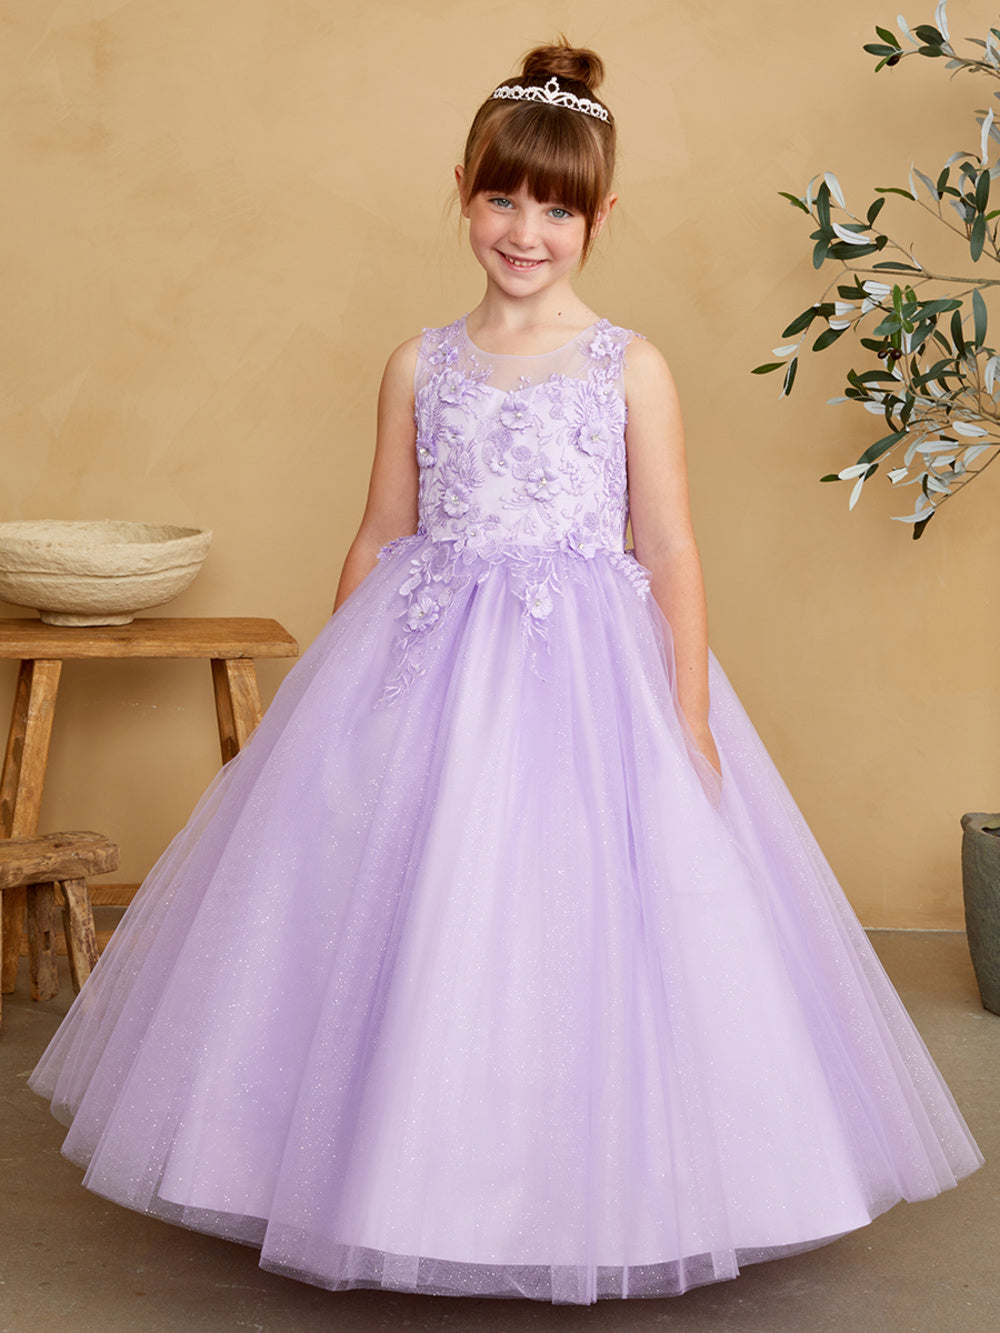 Girl Mini-Quince with Floral Tulle Bodice Dress by TIPTOP KIDS - AS7038